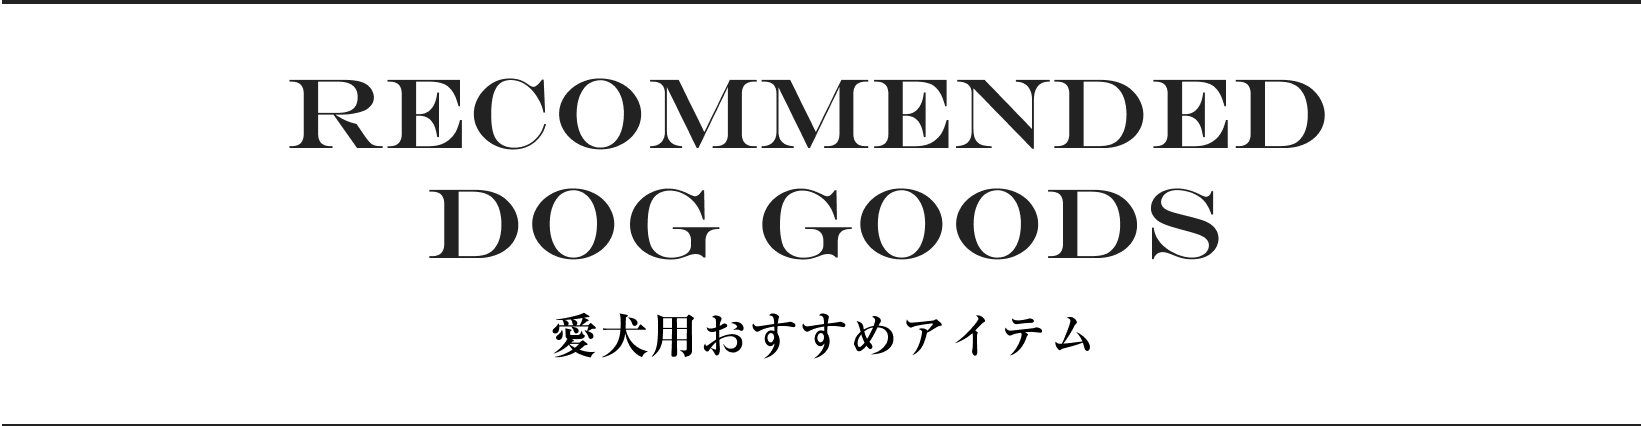 RECOMMENDED DOG GOODS 愛犬用おすすめアイテム